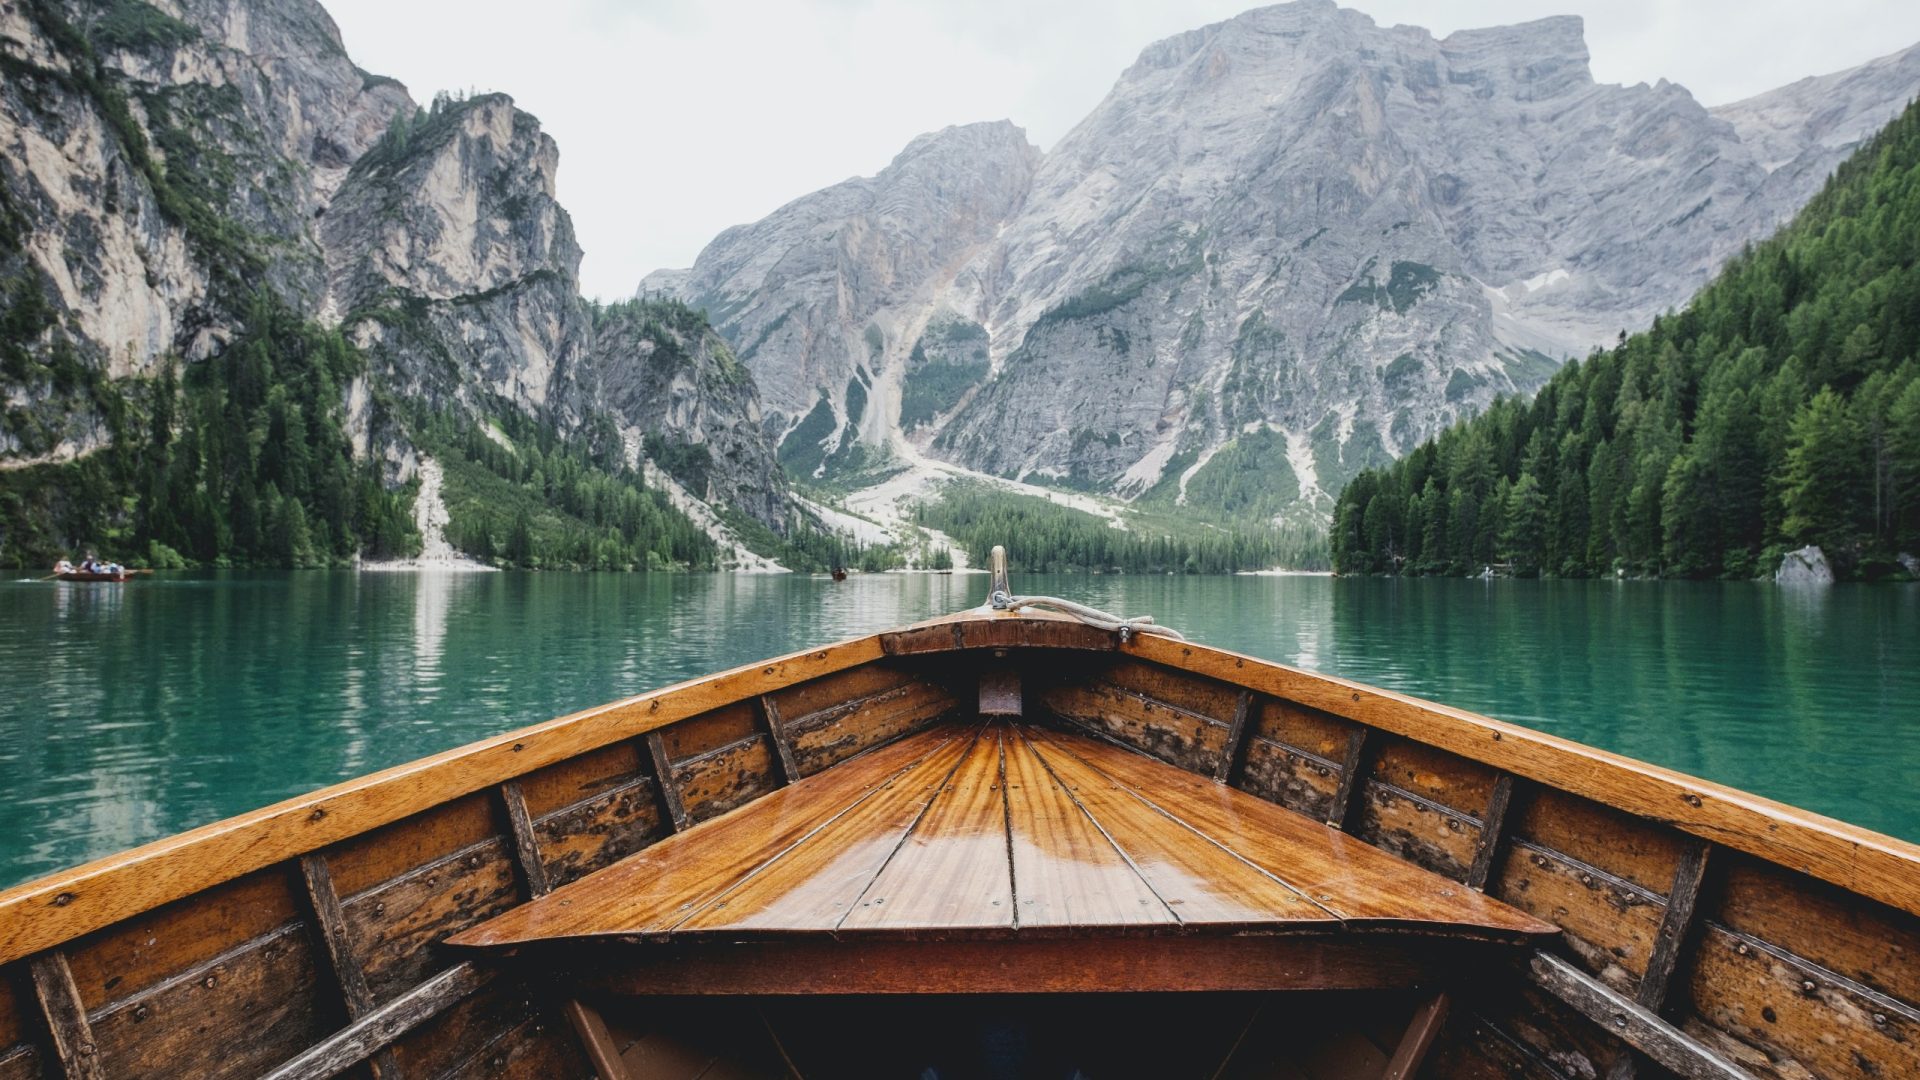 A wooden boat sailing on a lake with mountain views.